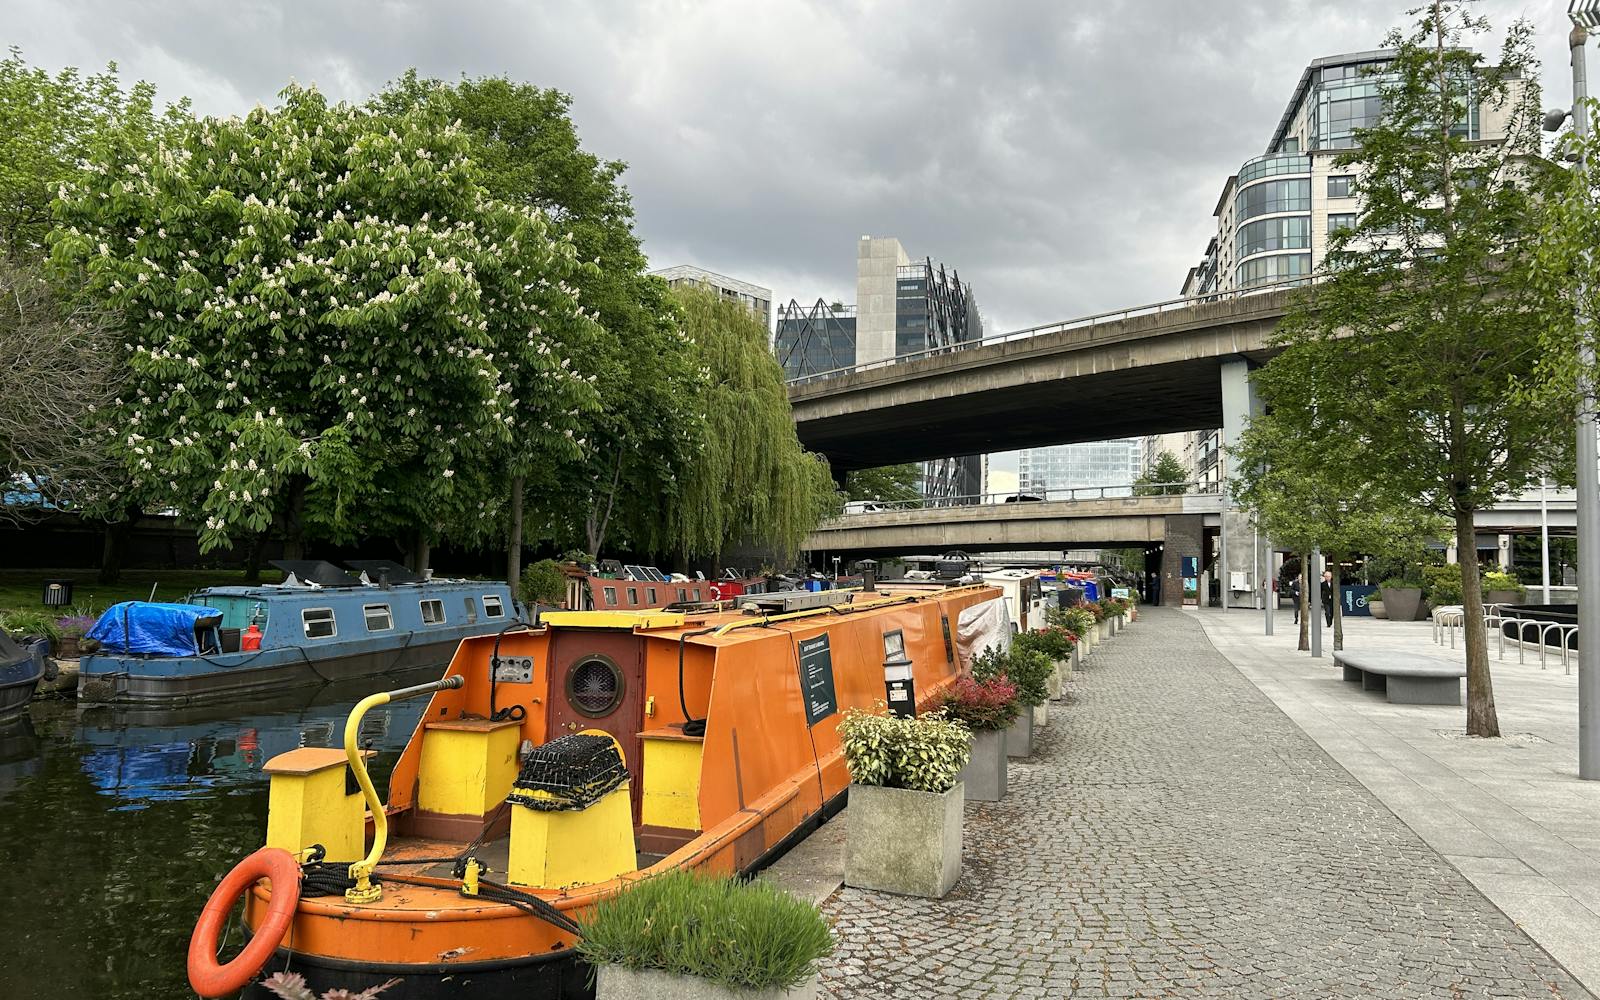 A canal with canal boats and city buildings in the background